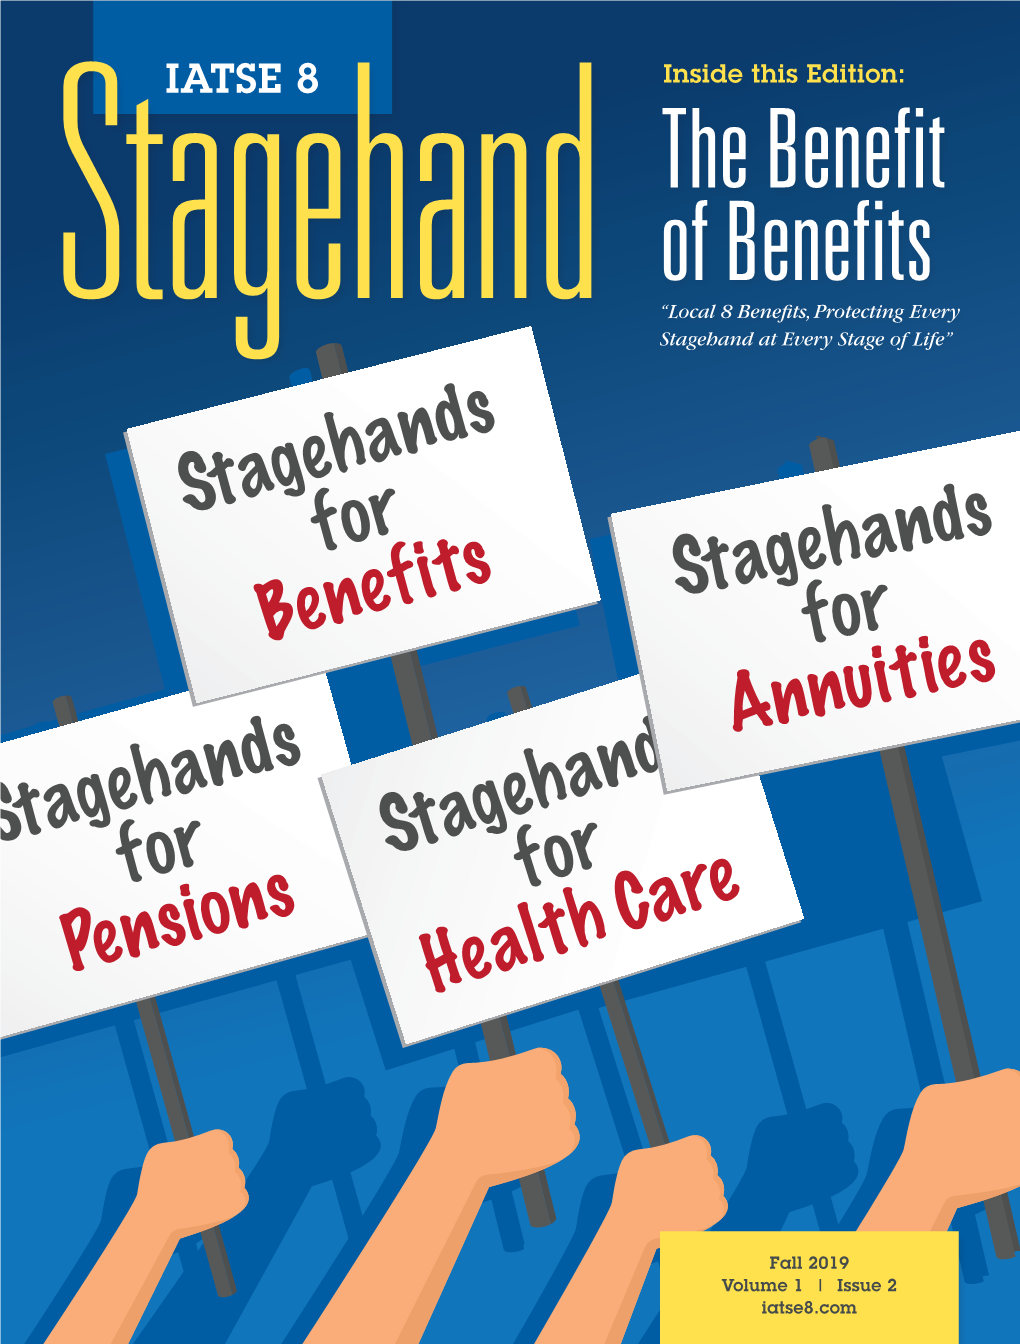 The Benefit of Benefits “Local 8 Benefits, Protecting Every Stagehand Stagehand at Every Stage of Life”